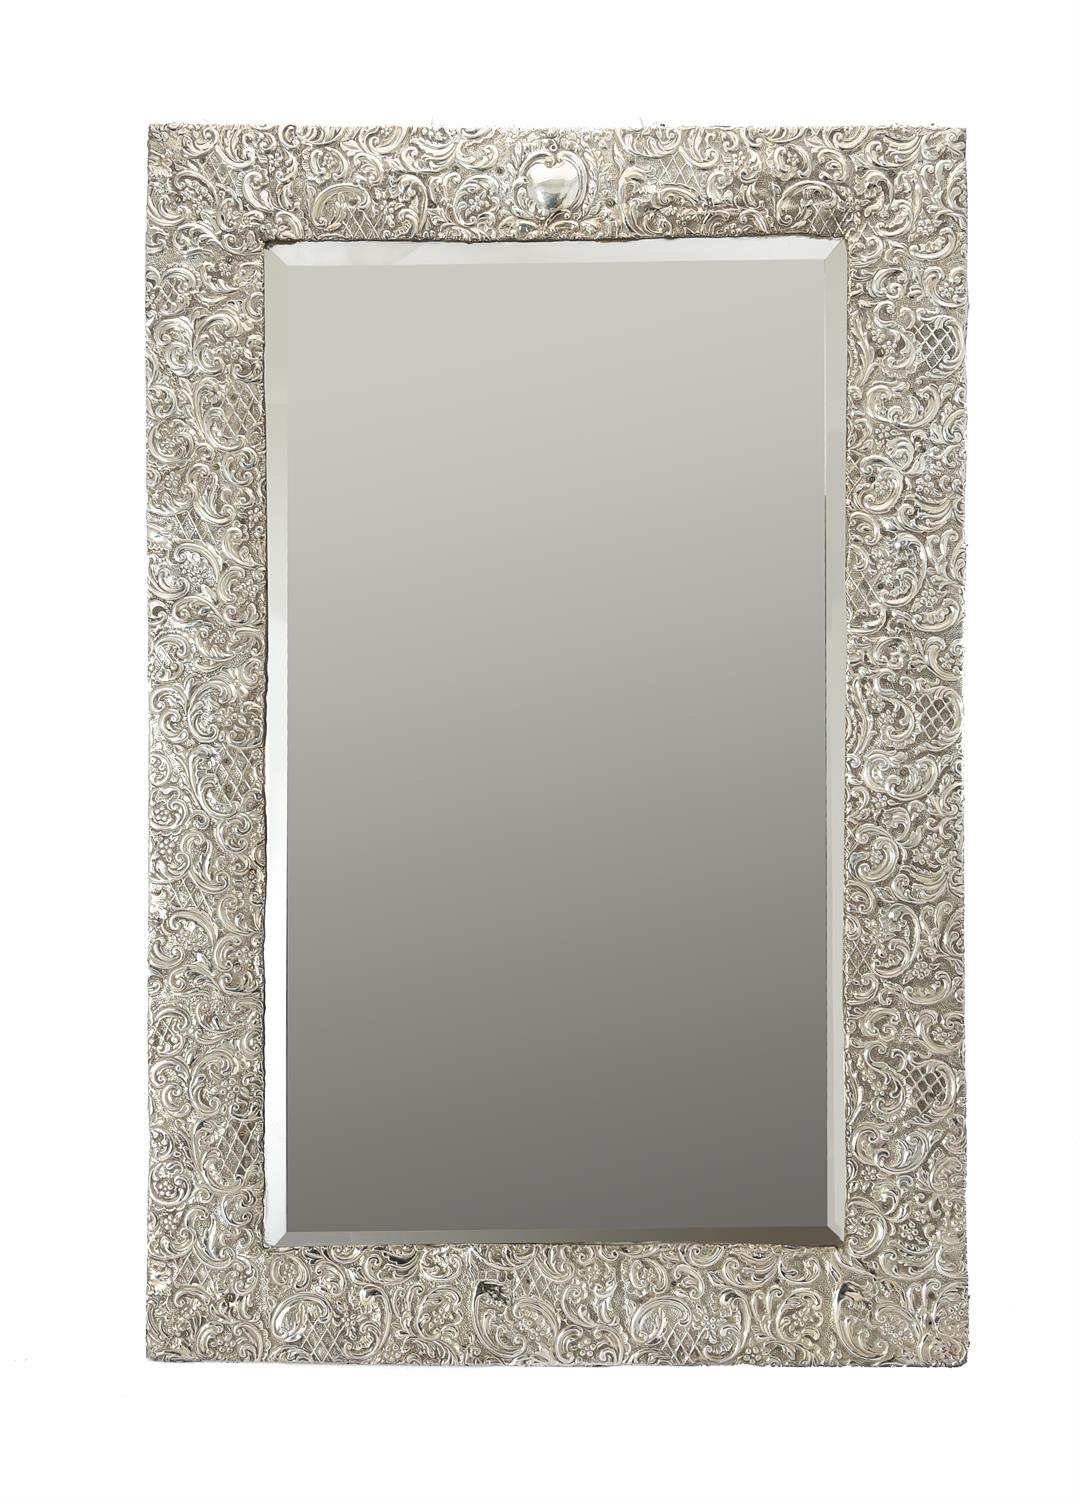 An Edwardian silver large rectangular wall or easel dressing mirror by A. & J. Zimmerman - Image 3 of 3